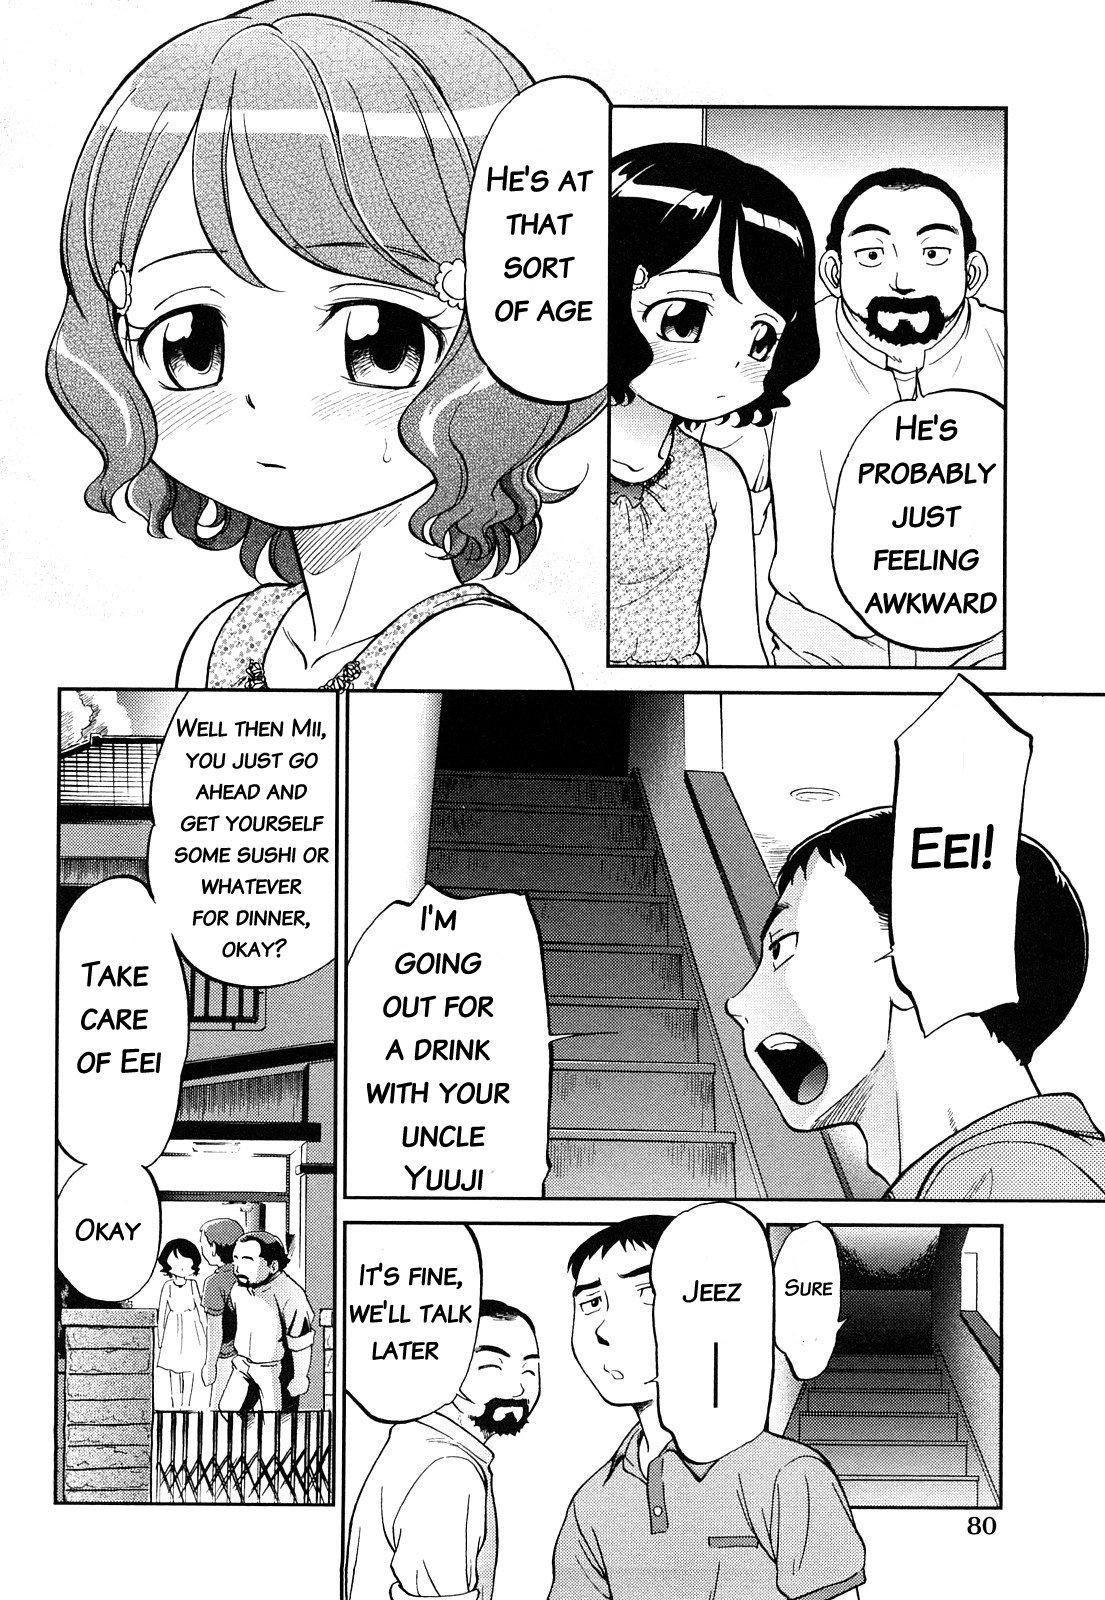 Edging Short Distance Relationship - The Cousin Stepfather - Page 2